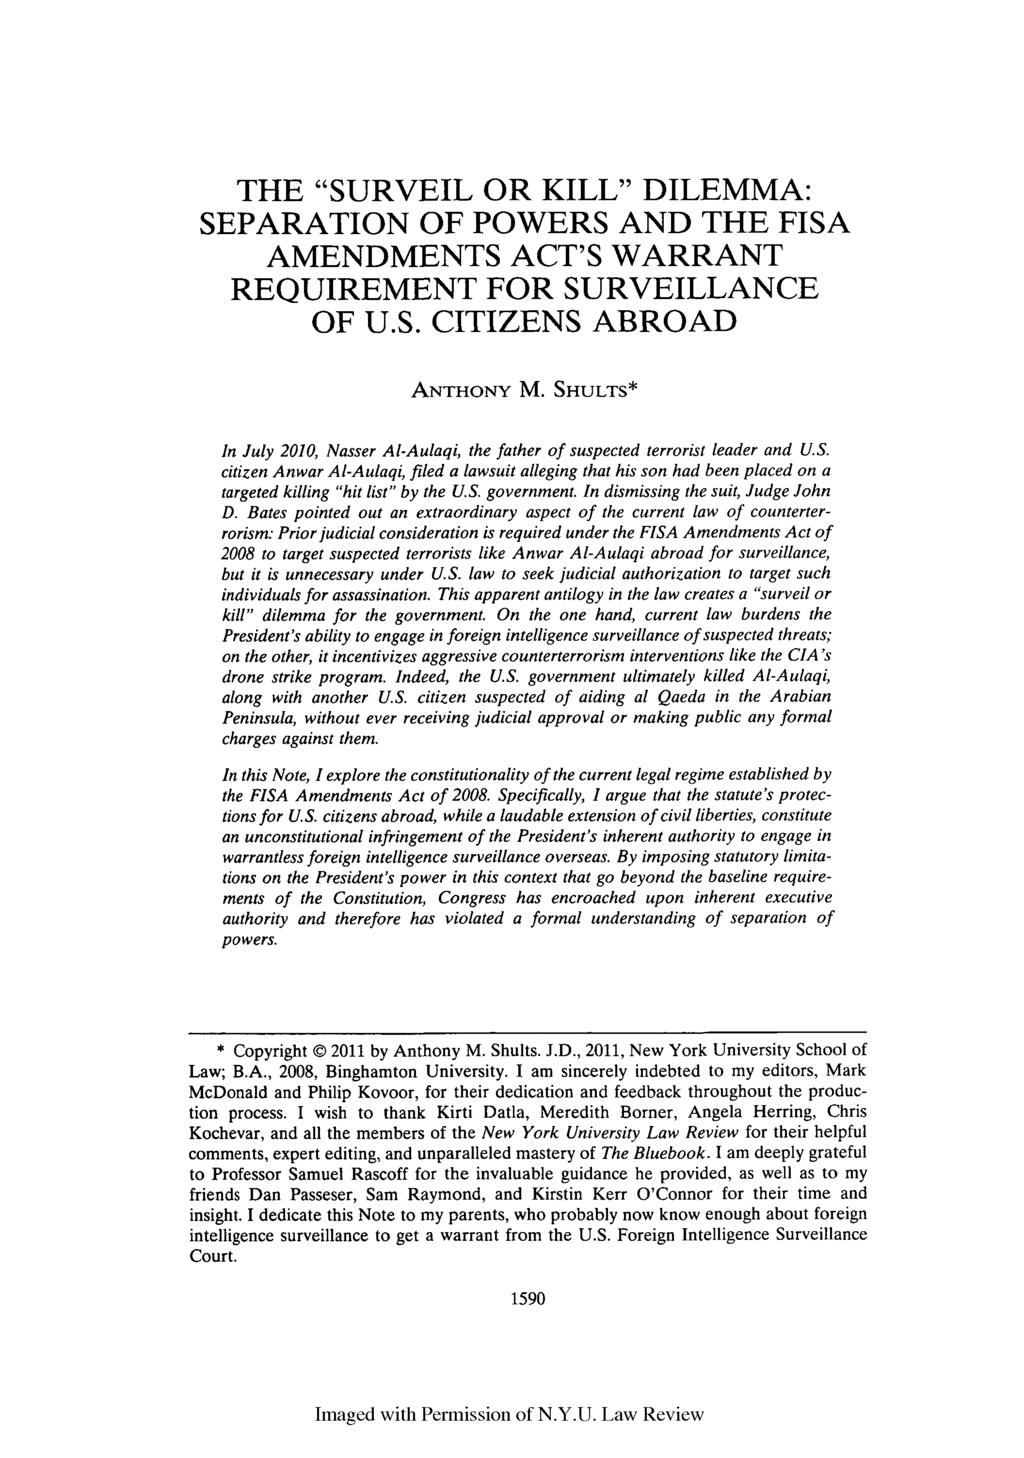 THE "SURVEIL OR KILL" DILEMMA: SEPARATION OF POWERS AND THE FISA AMENDMENTS ACT'S WARRANT REQUIREMENT FOR SURVEILLANCE OF U.S. CITIZENS ABROAD ANTHONY M.